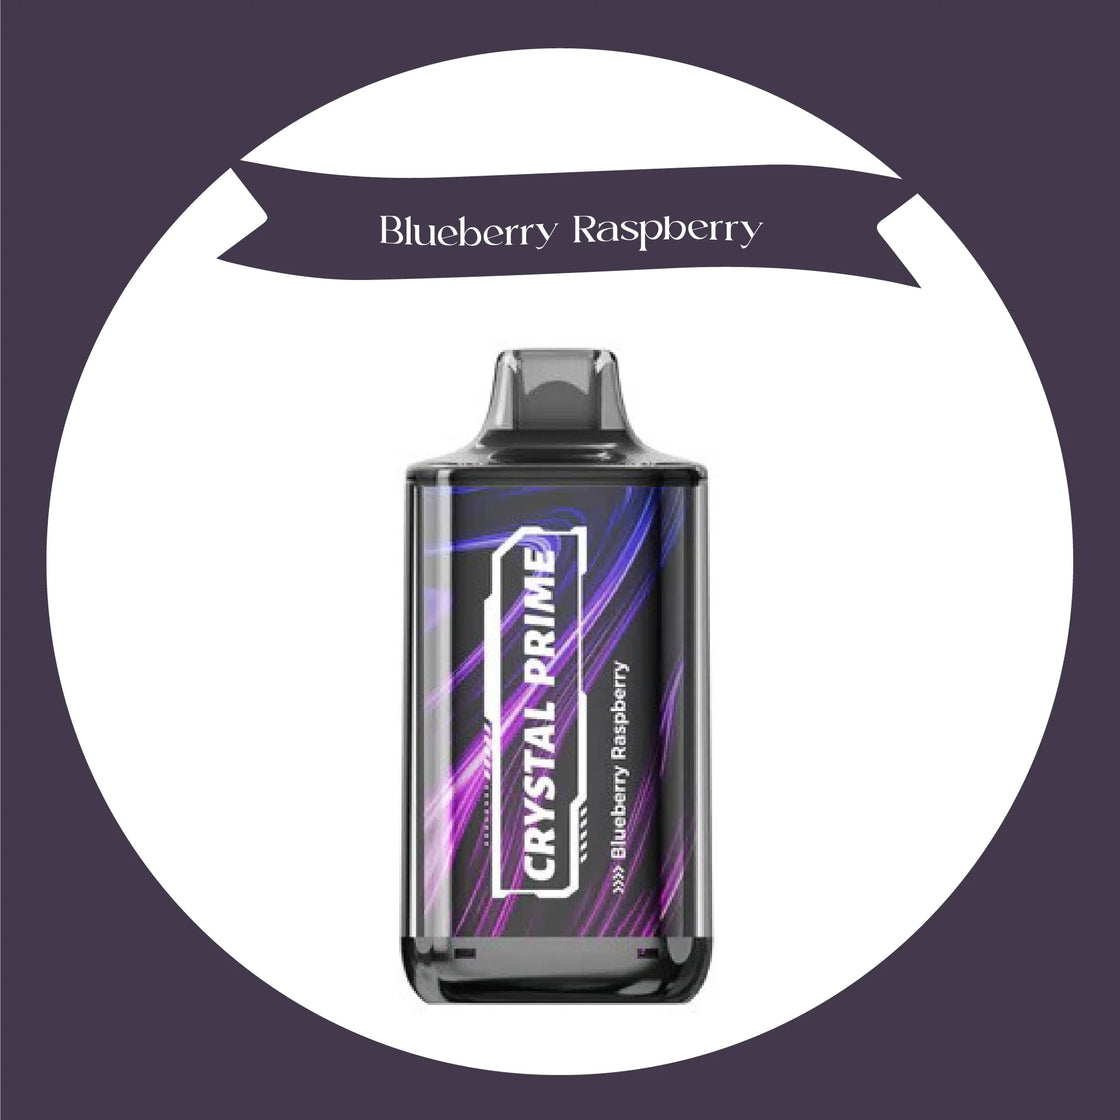 crystal-prime-deluxe-18000-puffs-uk-blueberry-raspberry